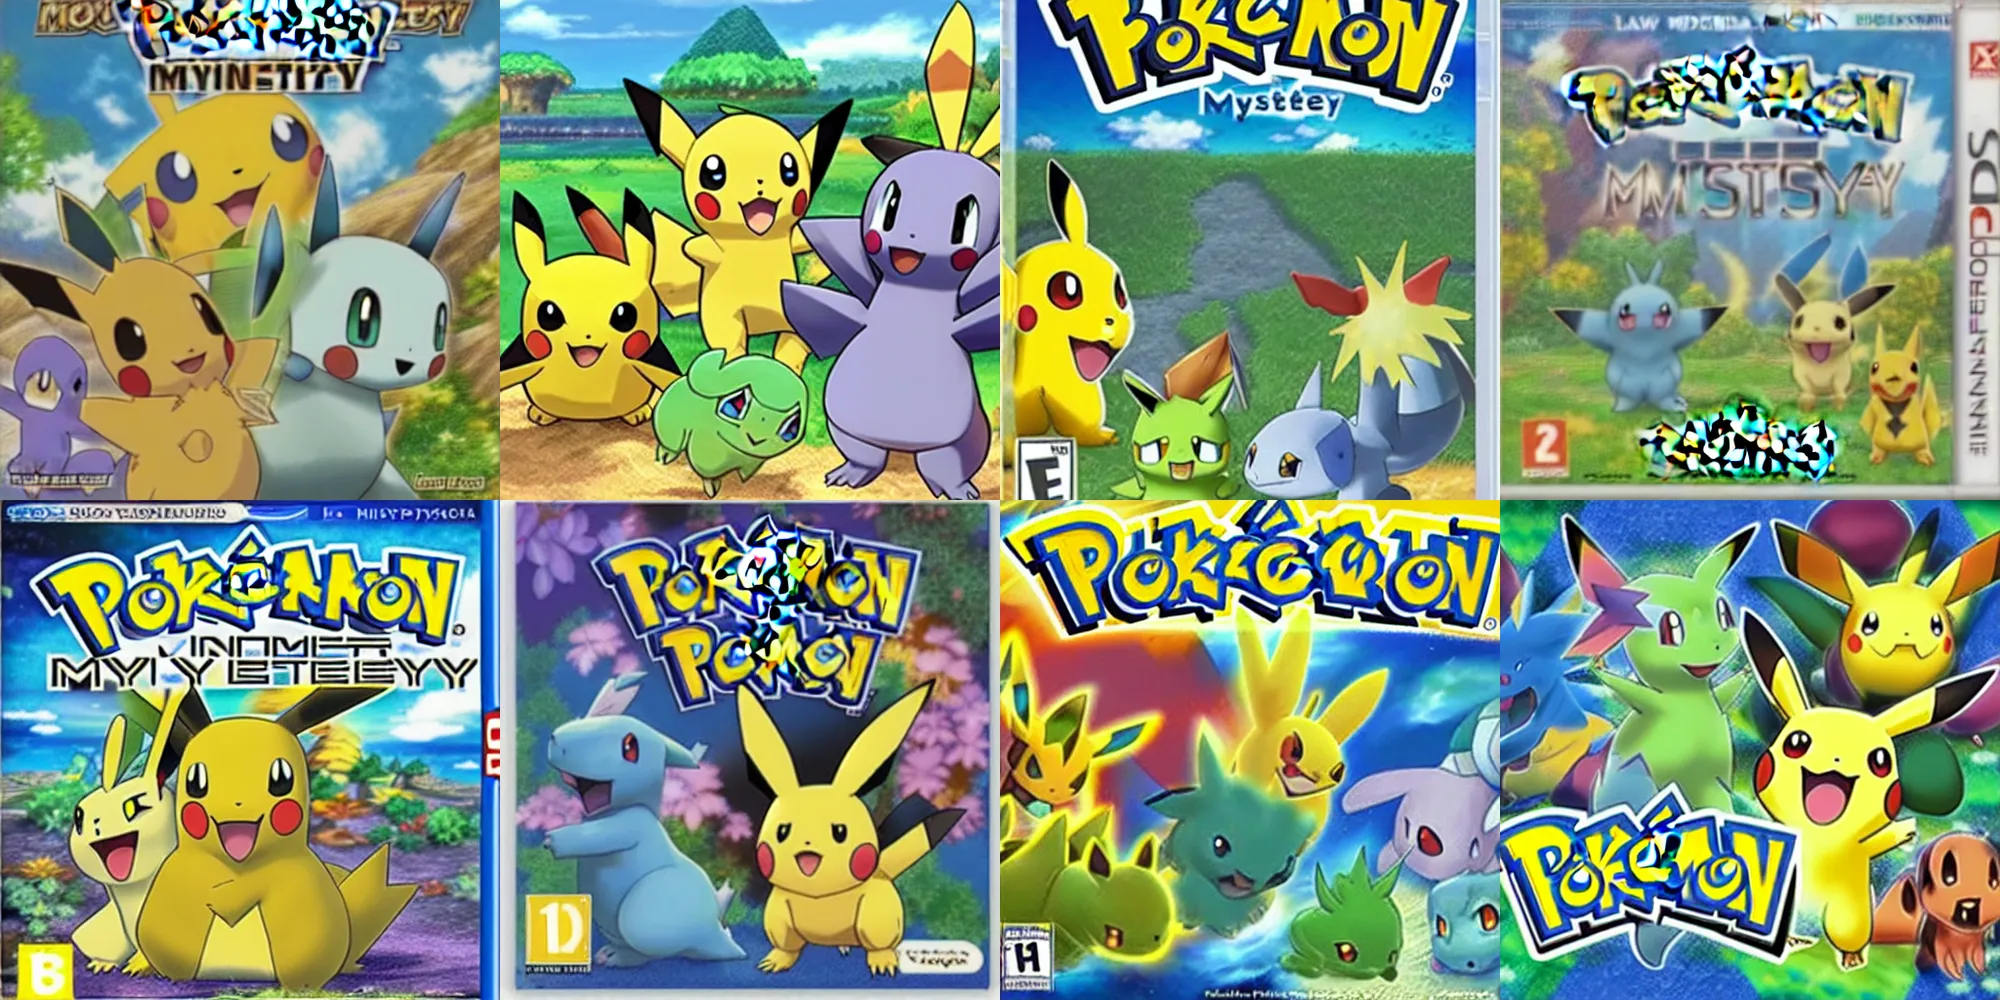 Prompt: the new cover of Pokémon Mystery Dungeon